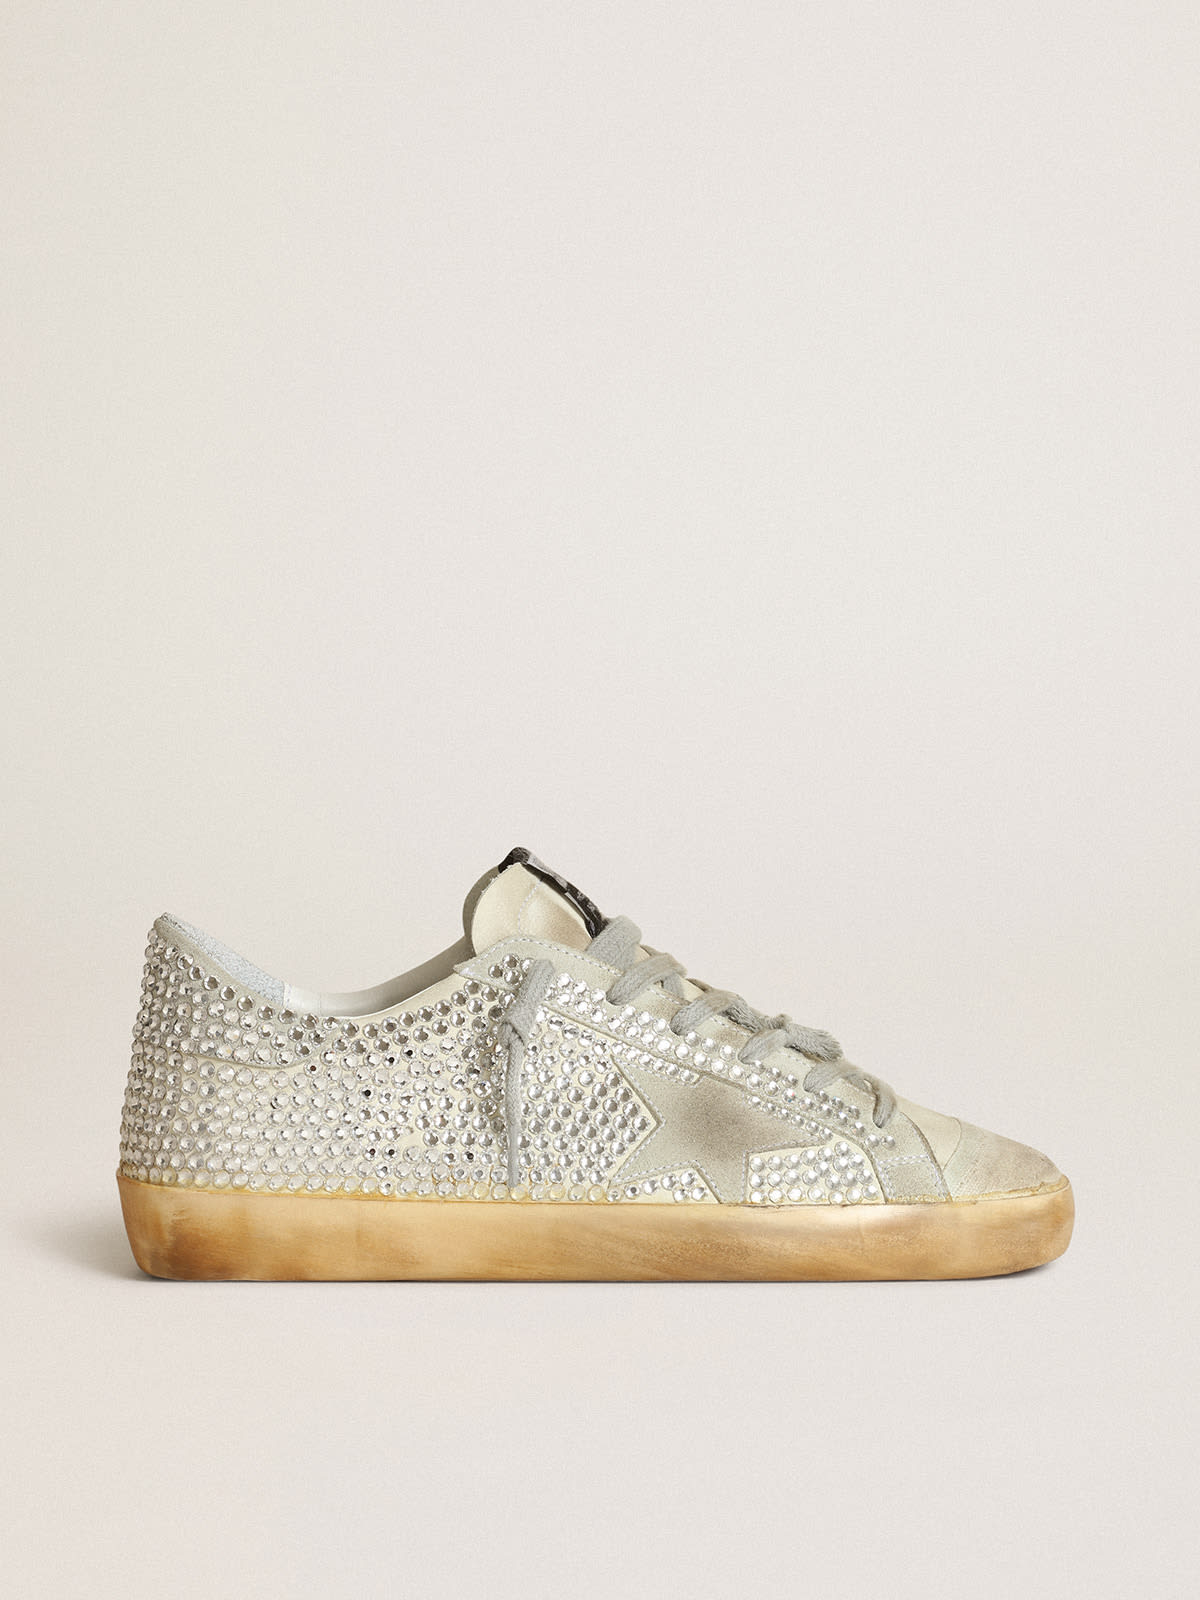 Golden Goose - Women's Super-Star in off-white nubuck and silver crystals in 